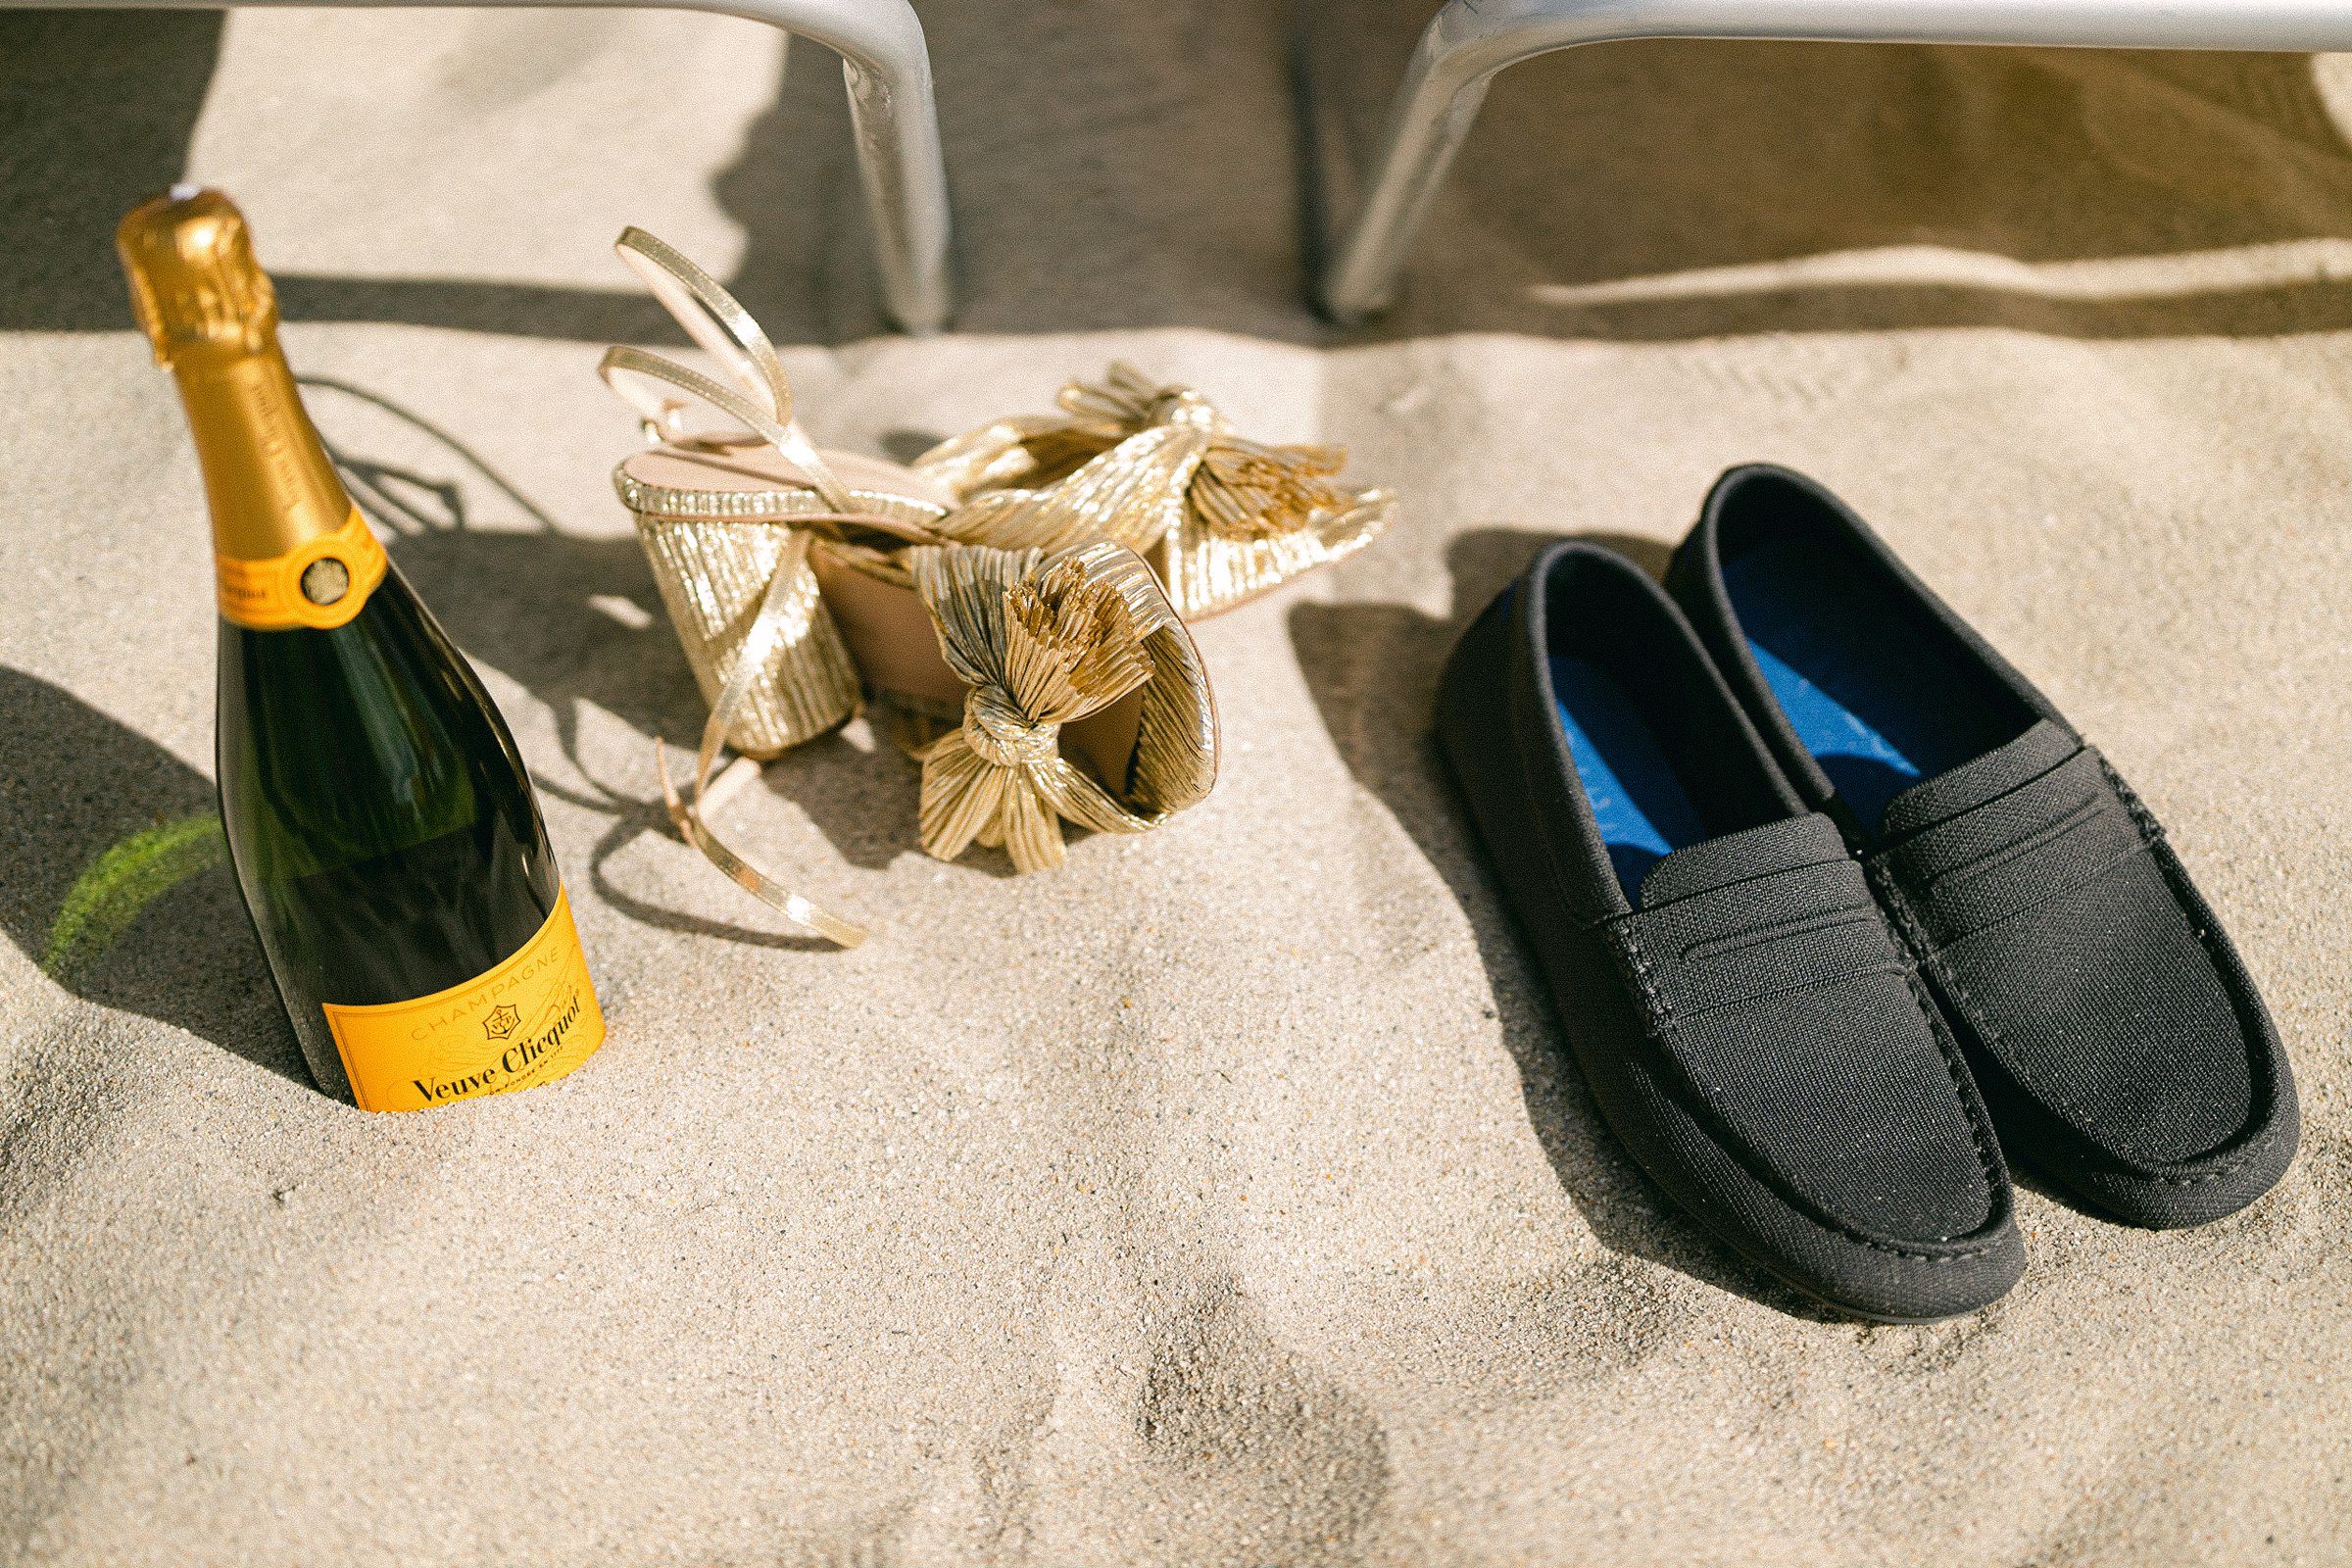 Veuve Cliquot, high heels and loafers at the Confidante Hotel in Miami Beach